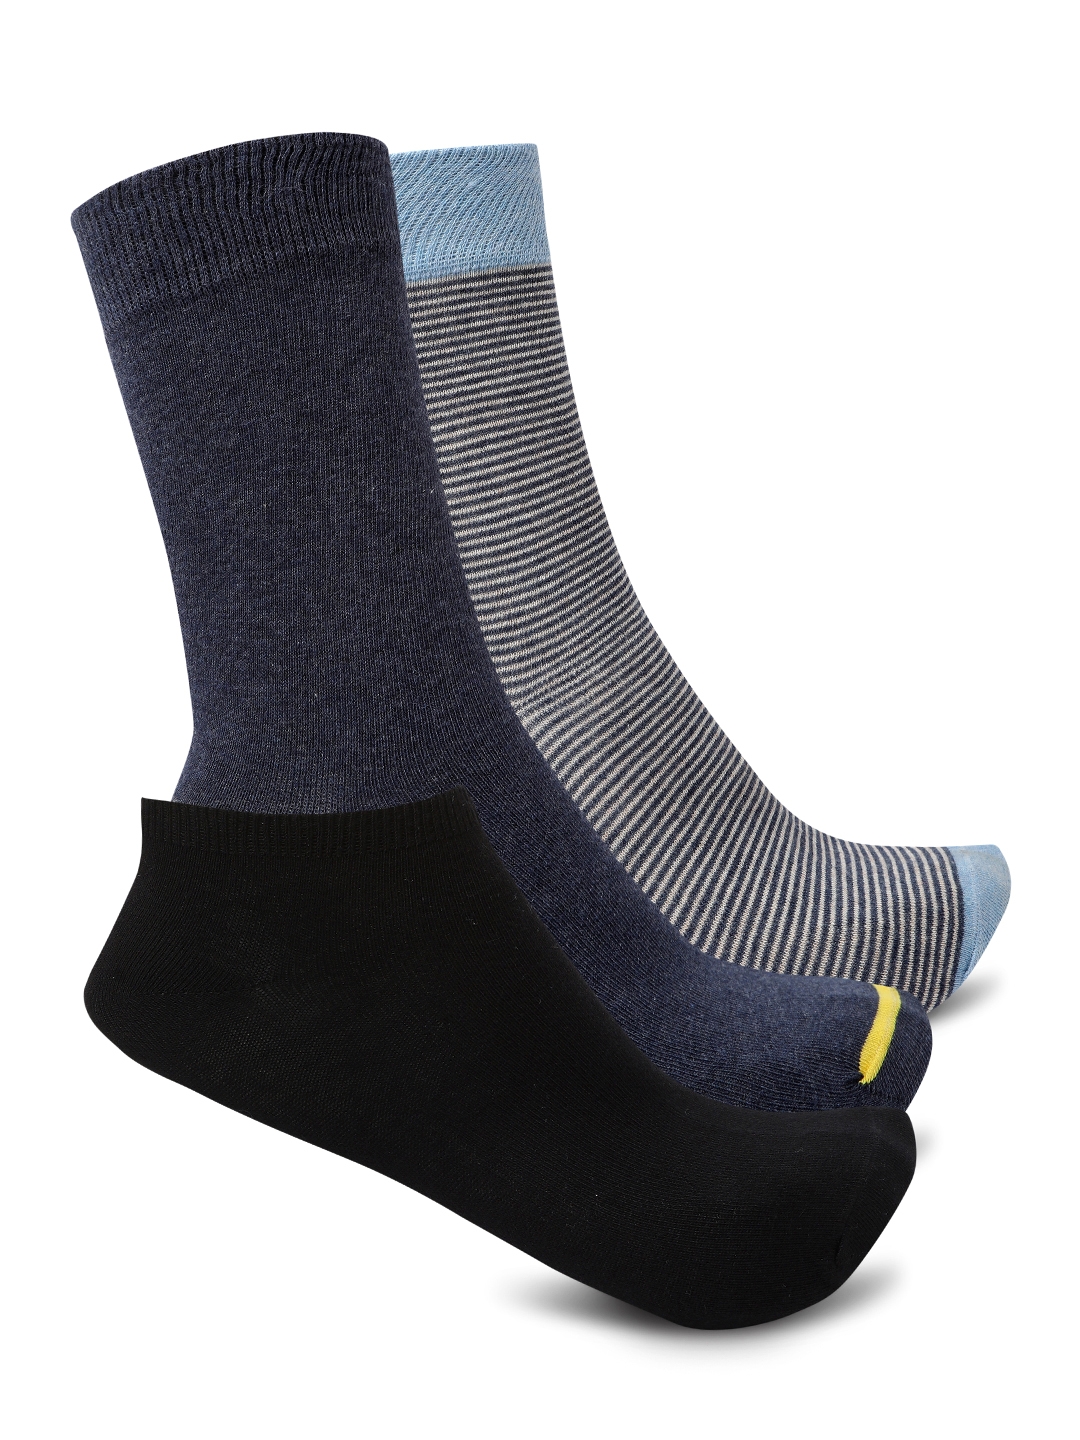 Smarty Pants | Smarty Pants men's pack of 3 solid and printed cotton socks.